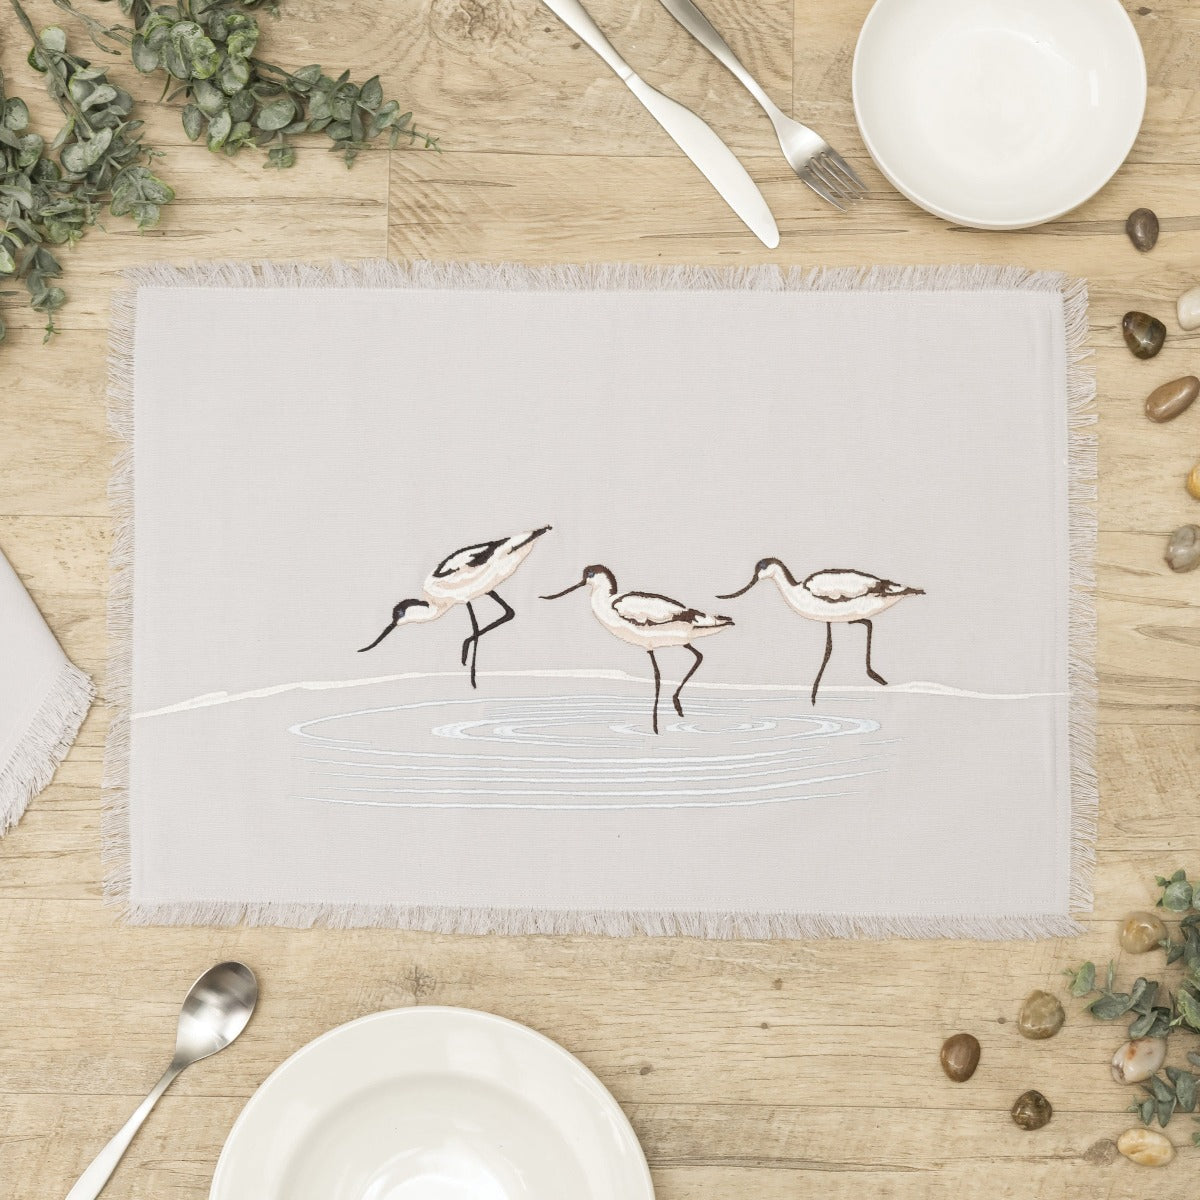 Avocets wading in waves embroidered placemat with fringe.